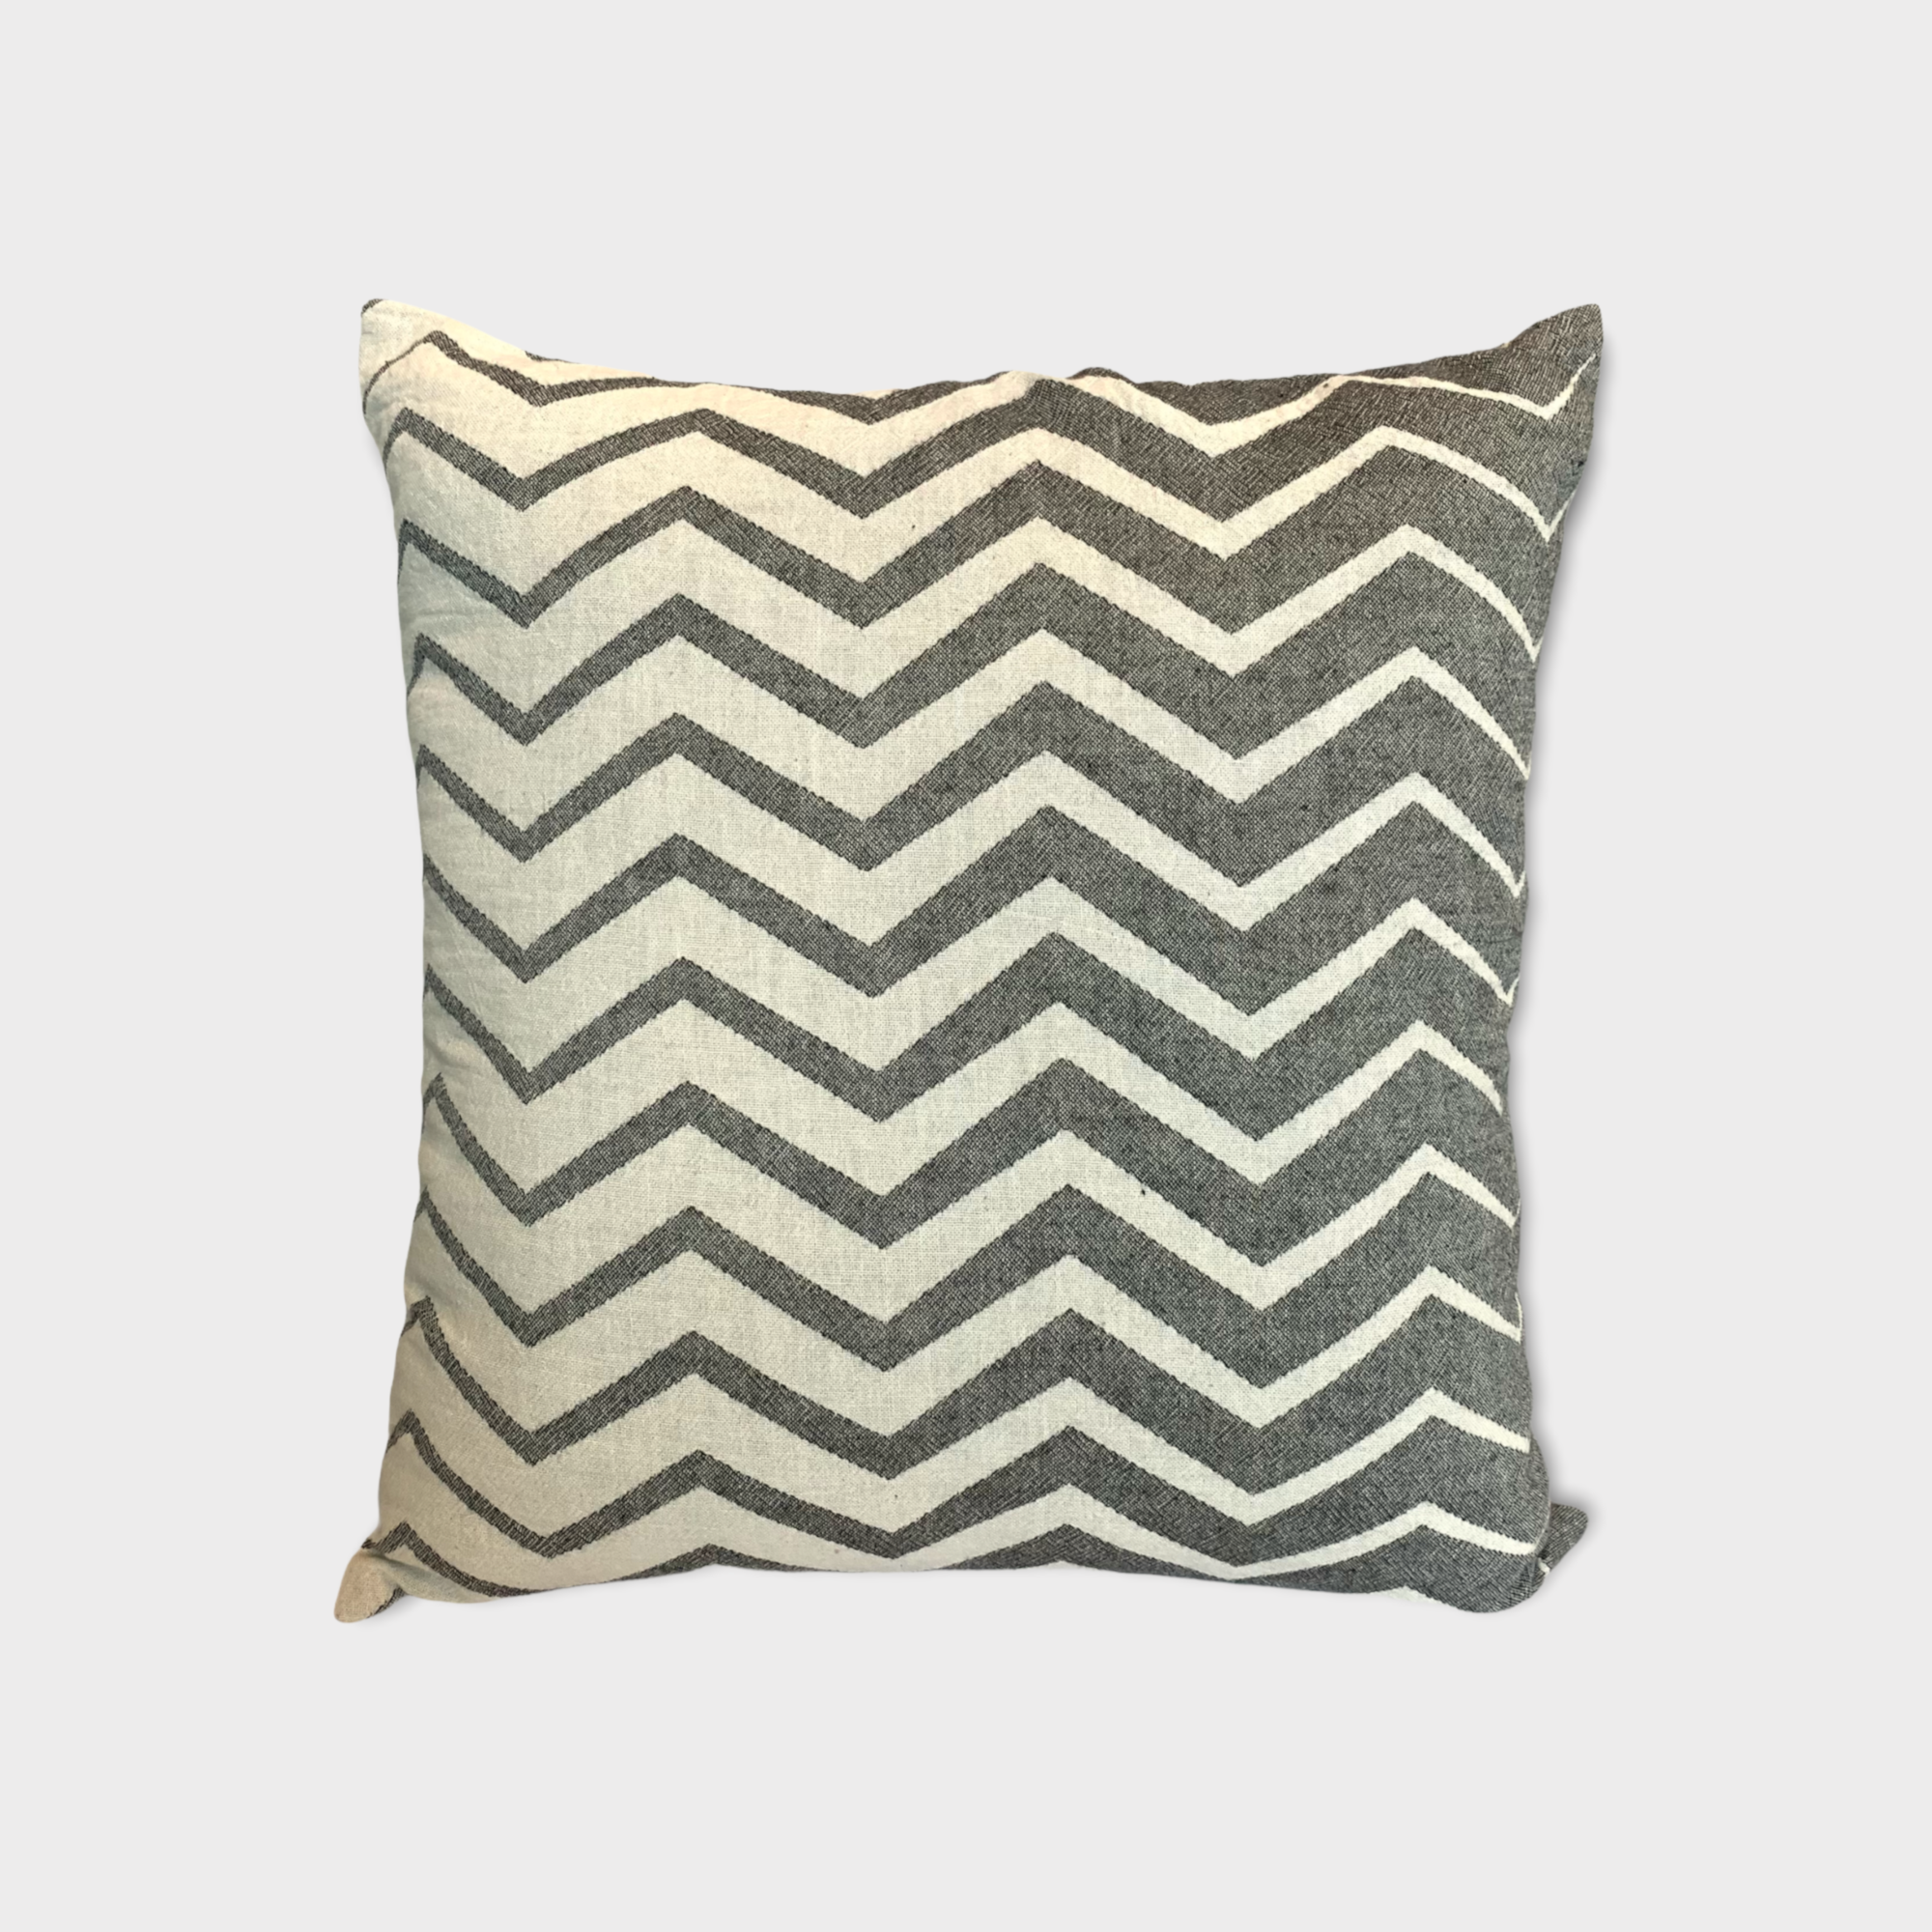 Handwoven pillow cover ZIGZAG from Turkey